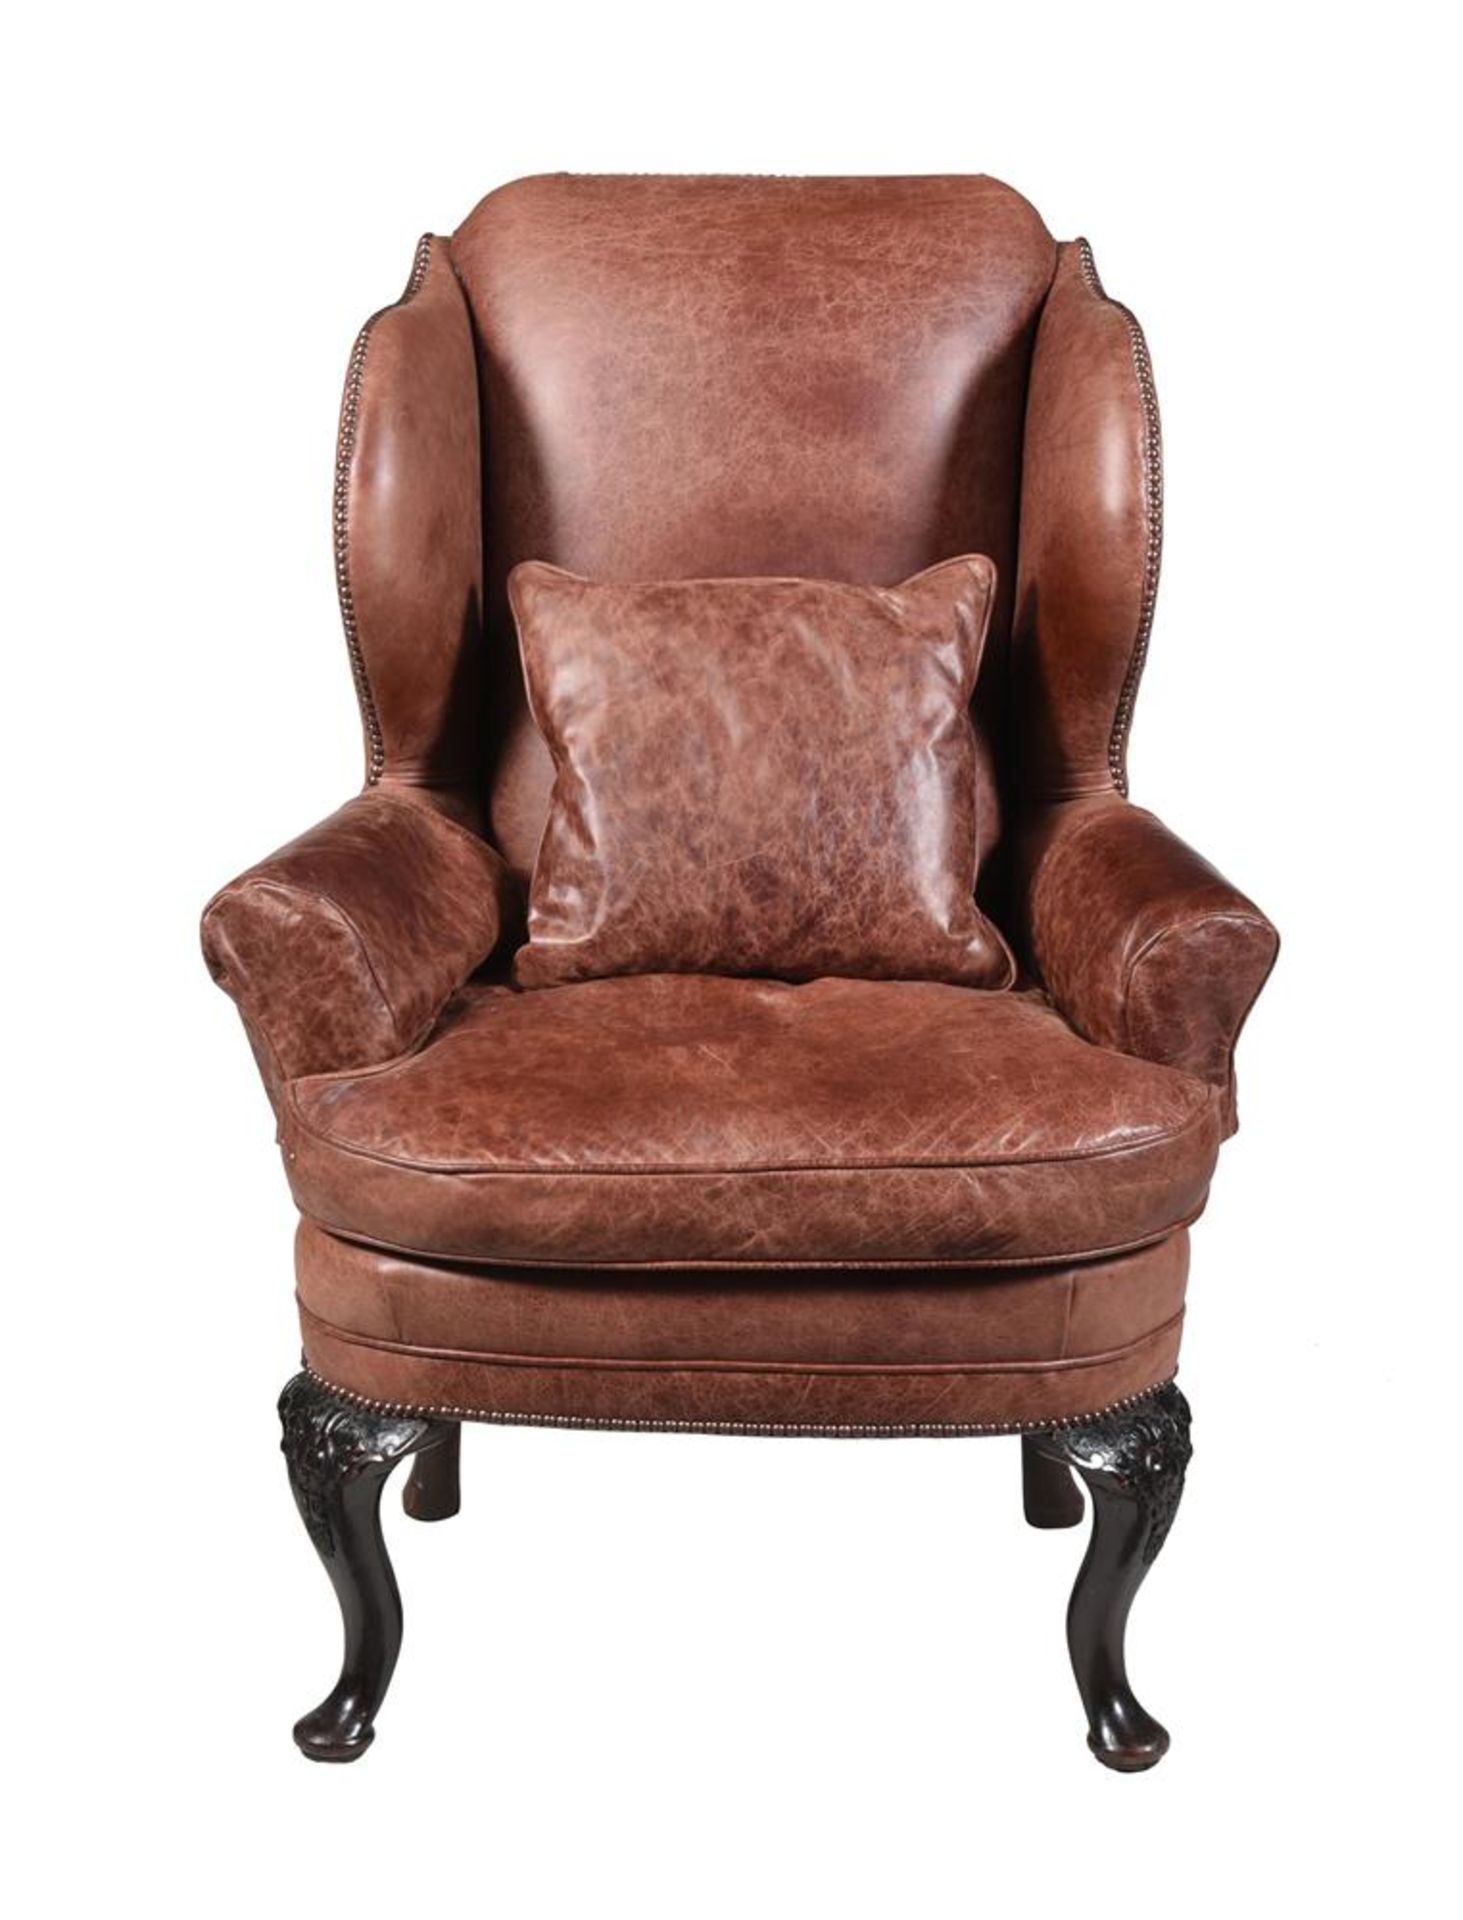 A MAHOGANY AND LEATHER UPHOLSTERED WING ARMCHAIR, SECOND HALF 18TH CENTURY AND LATER